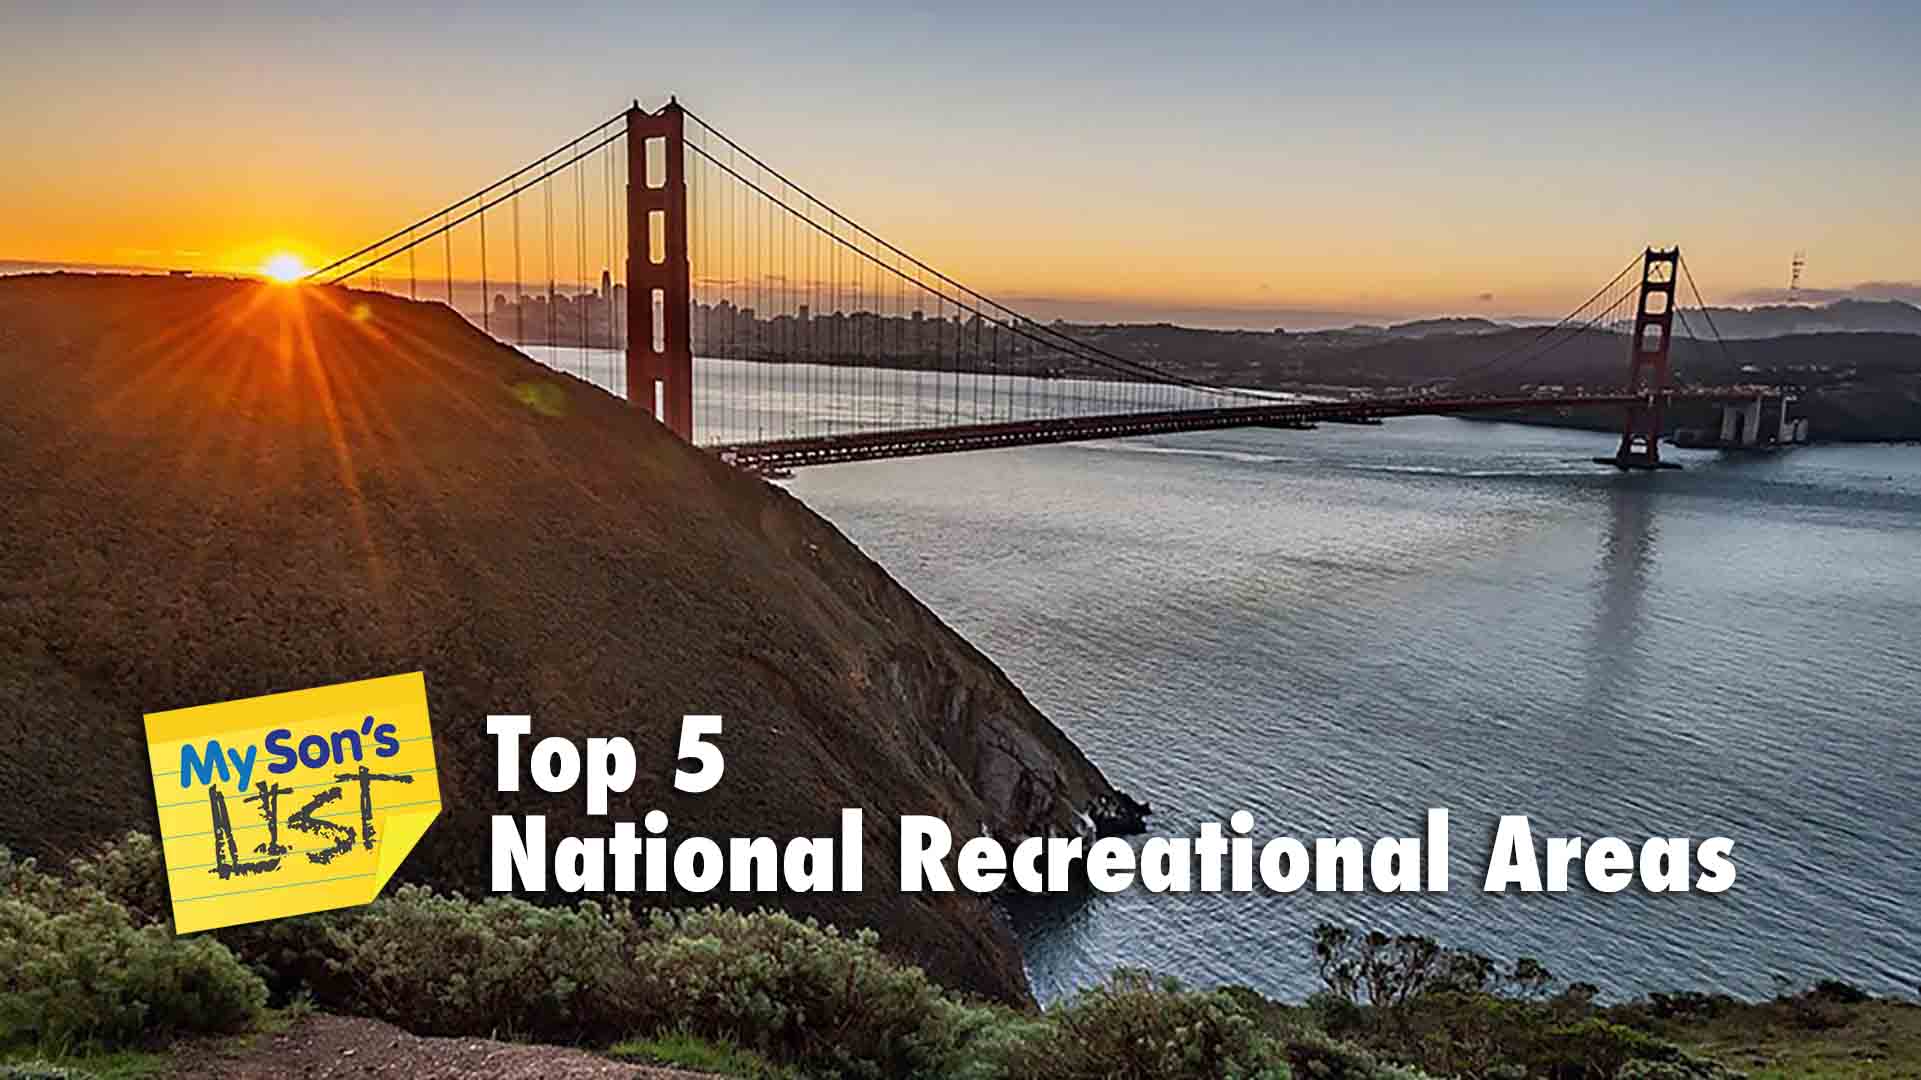 Top 5 National Recreation Areas in the US